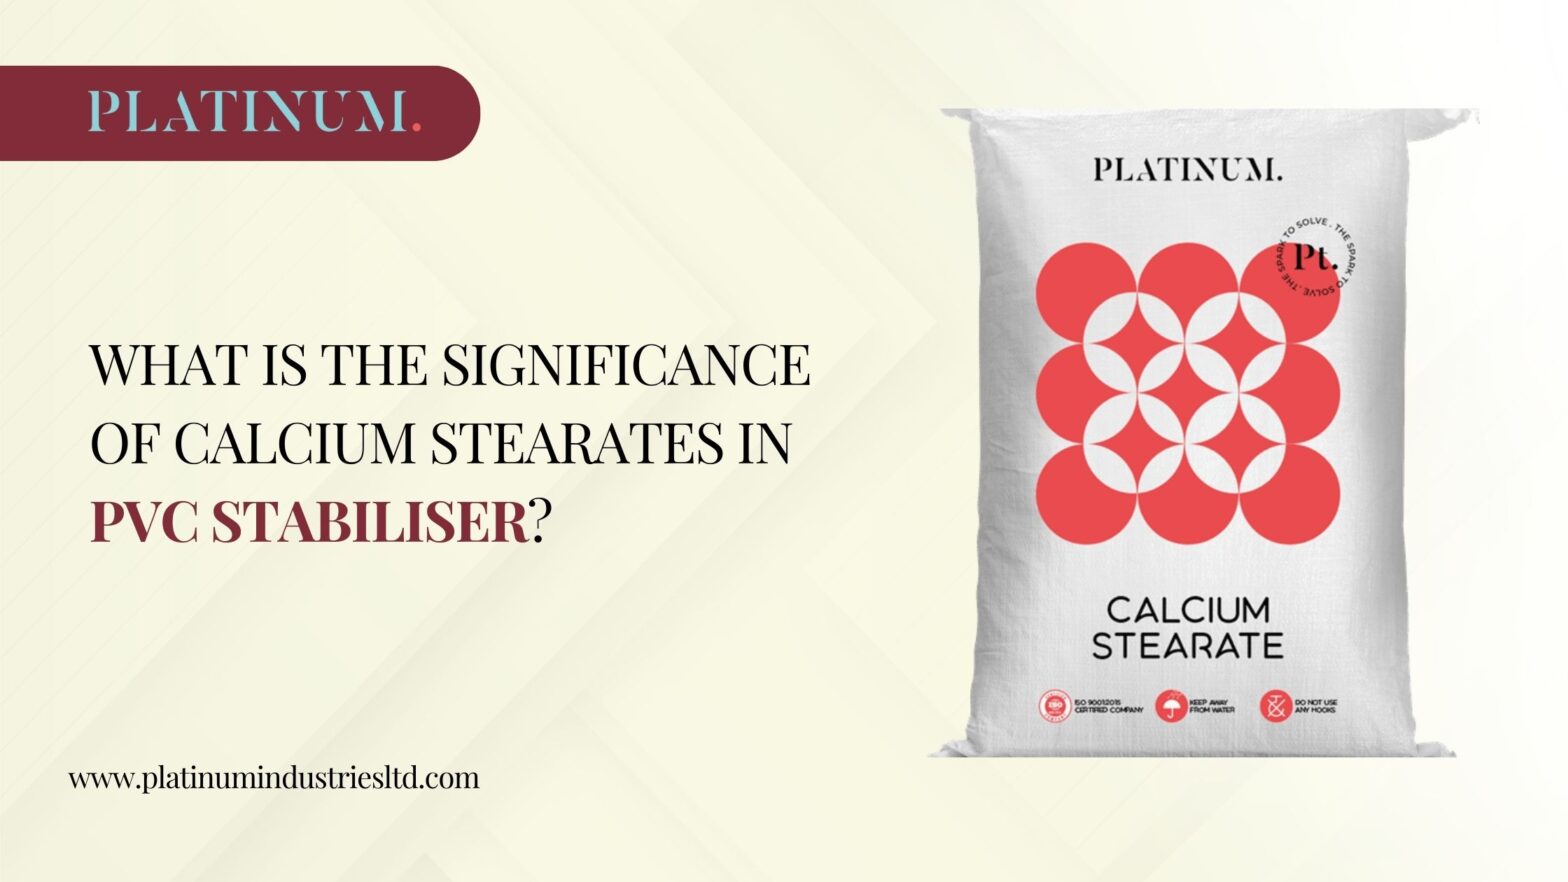 What Is The Significance Of Calcium Stearates In Pvc Stabiliser?